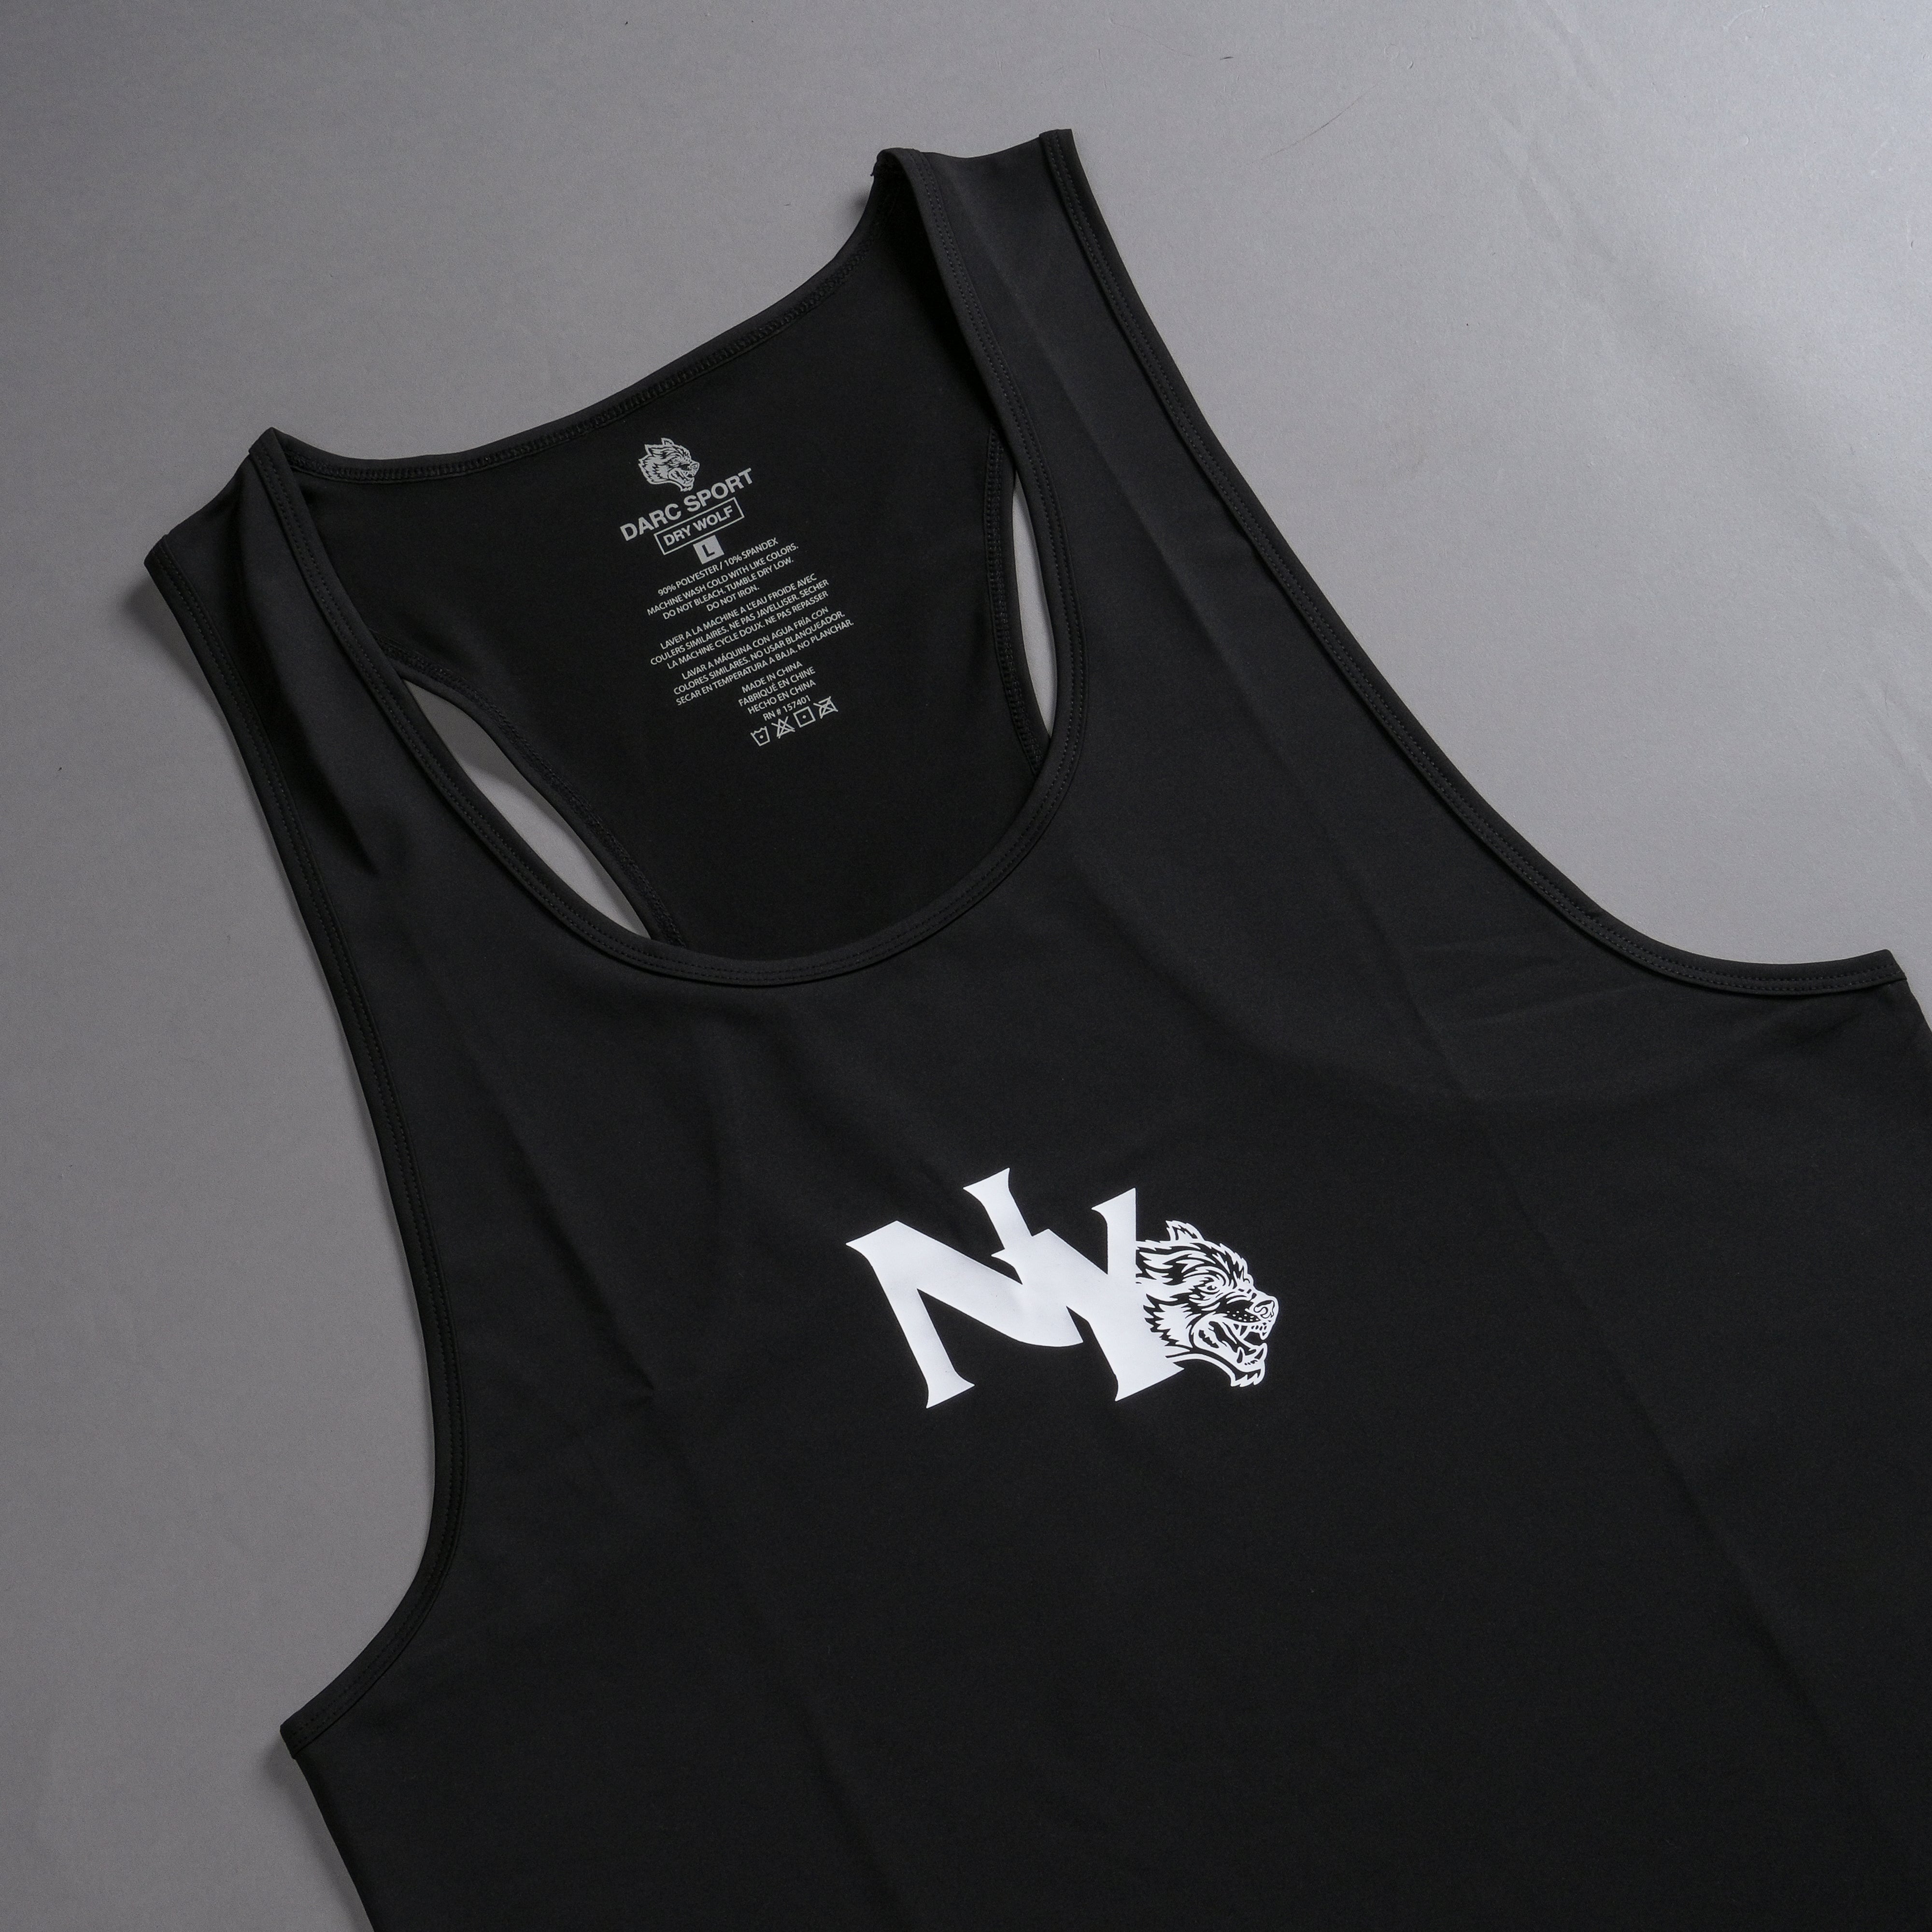 NY Wolf "Dry Wolf" (Mecca) Tank in Black